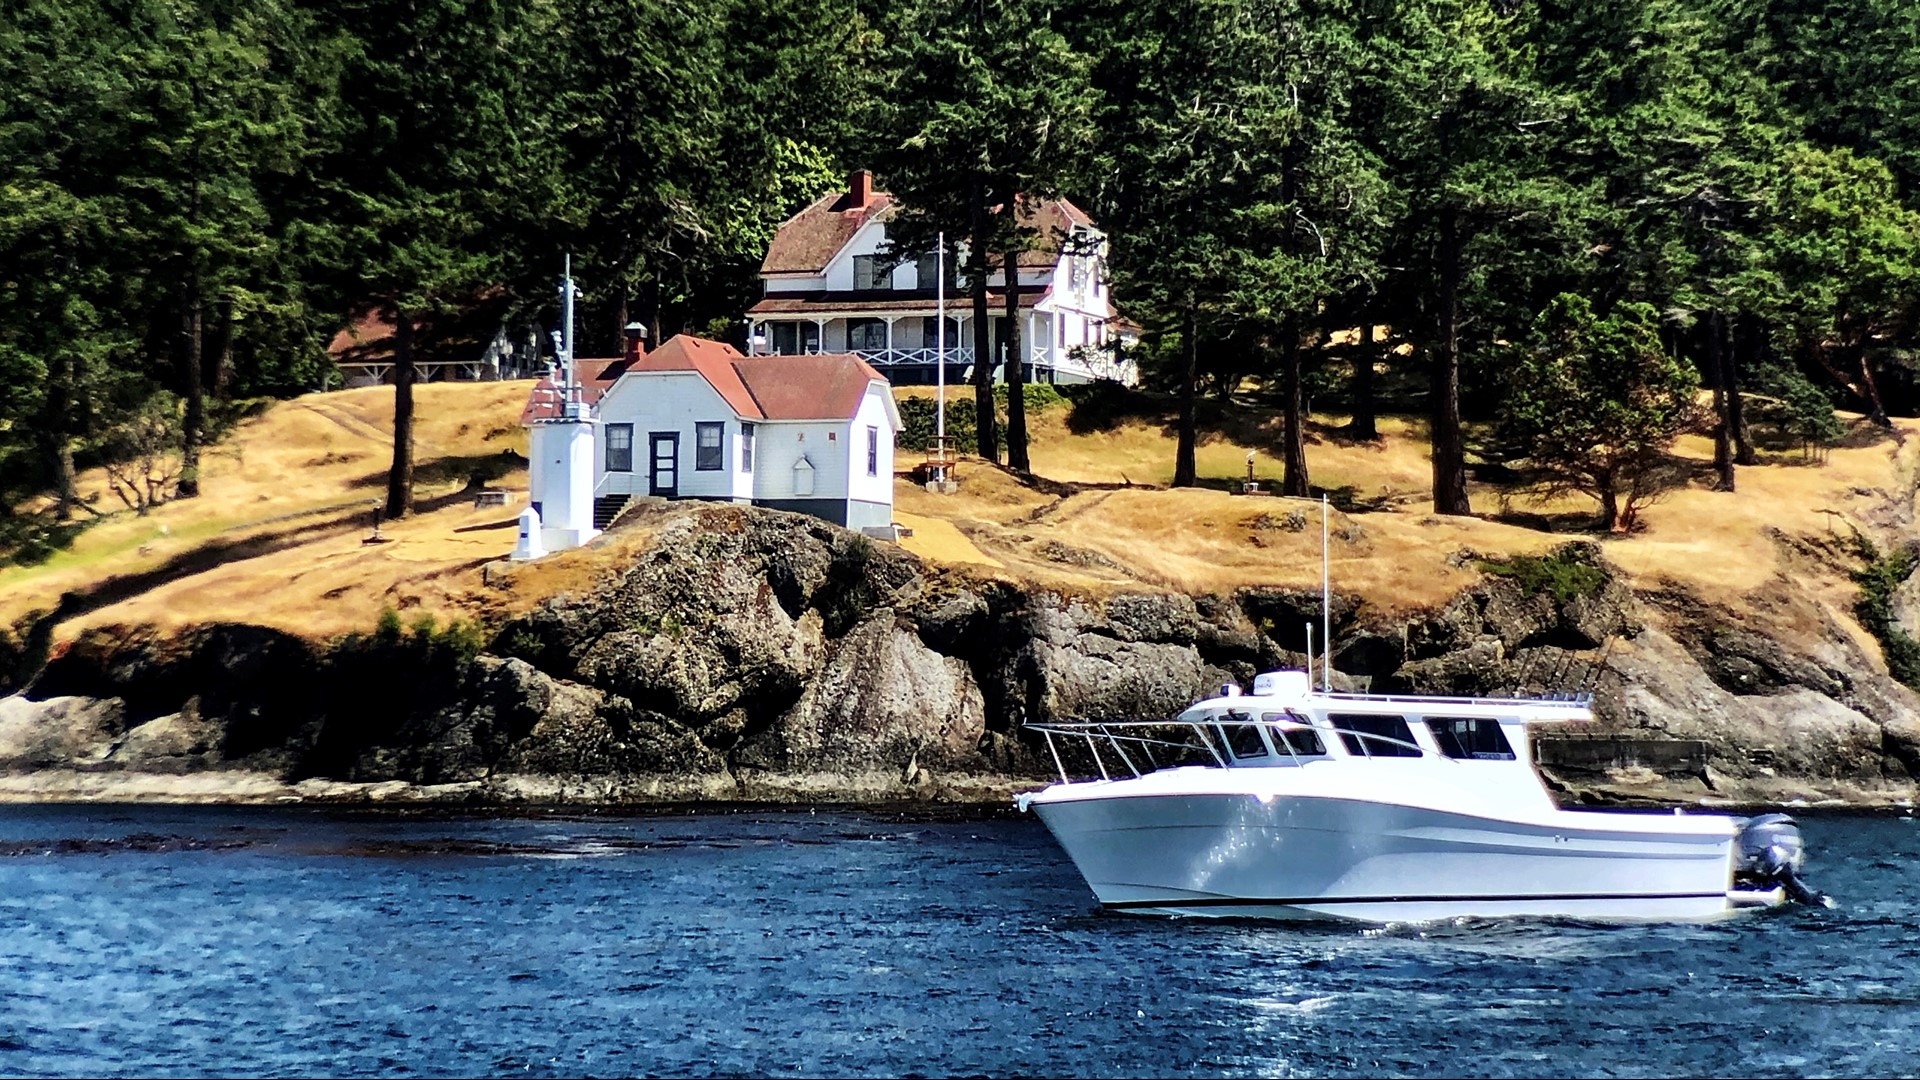 Explore the San Juan Island that has a population of 20 people